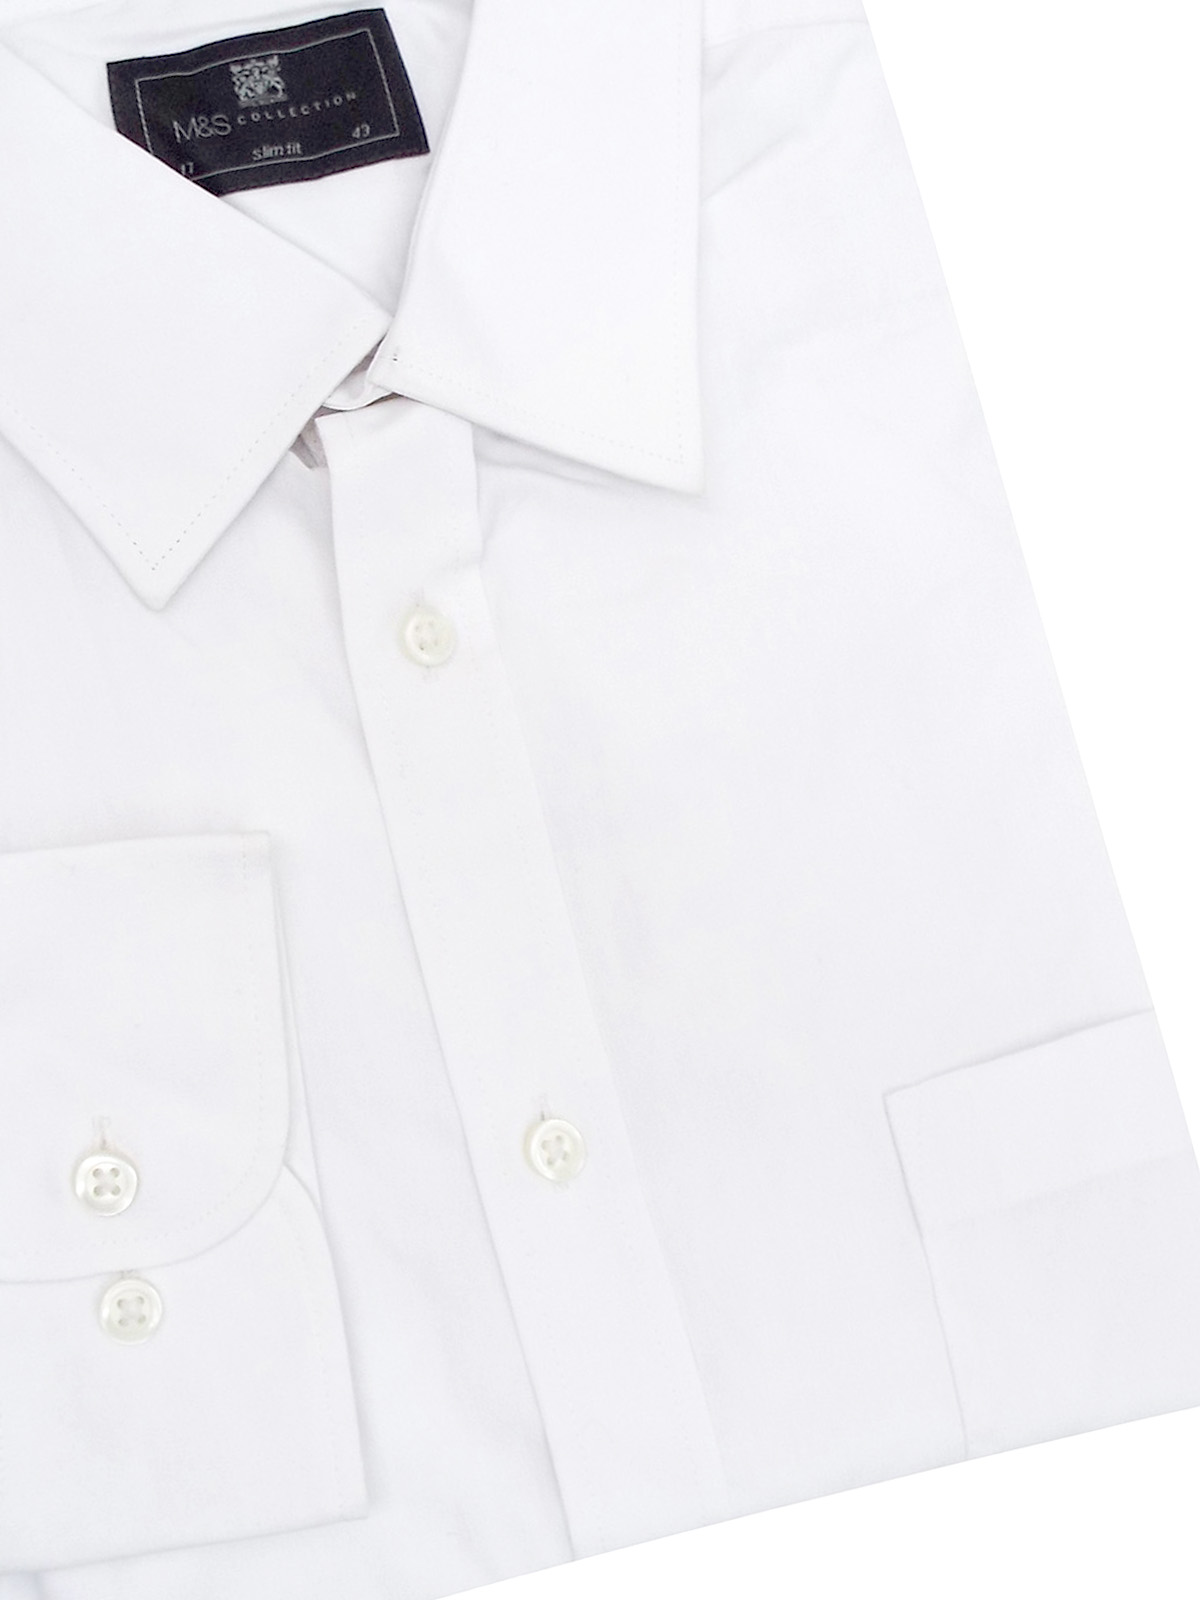 Marks and Spencer - - M&5 WHITE Pure Cotton Long Sleeve Slim Fit Shirt ...